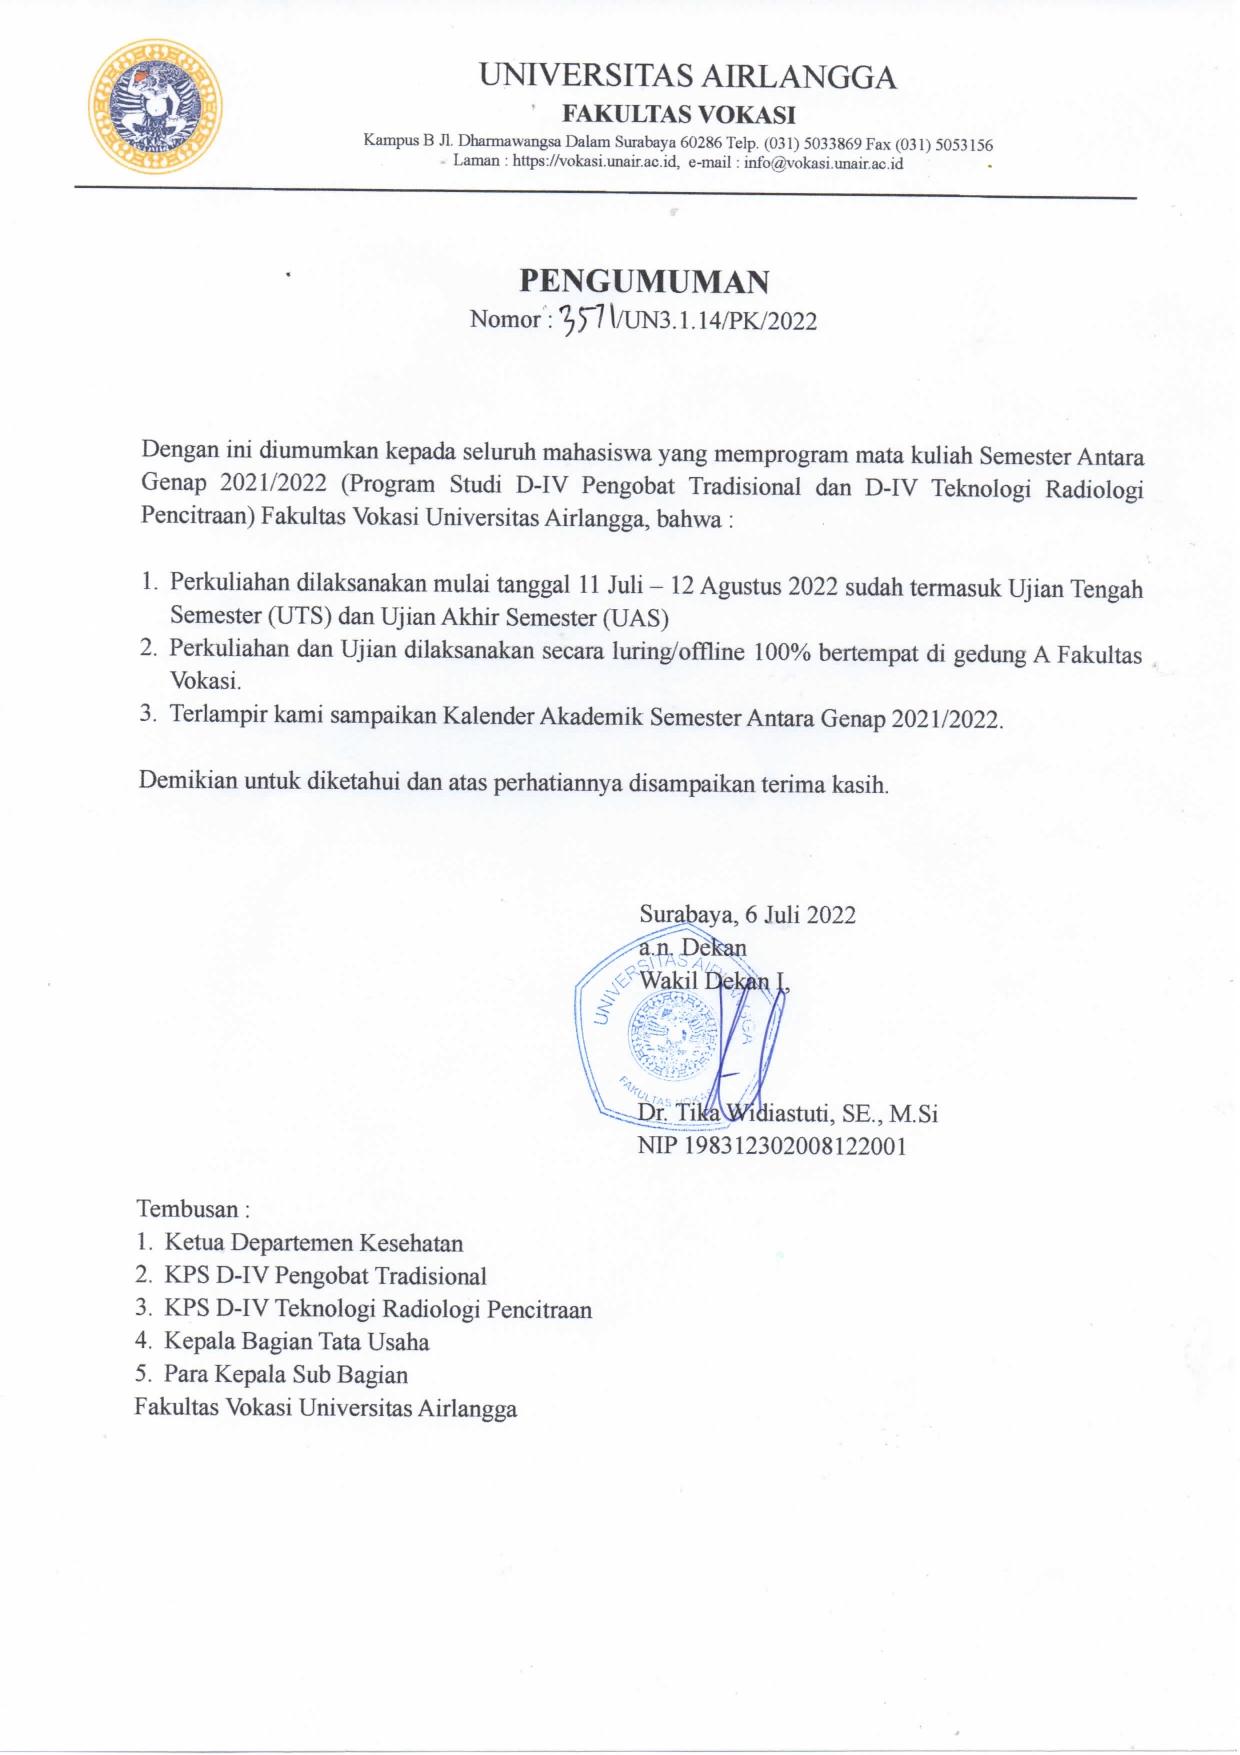 Announcement of Intermediate Semester for D4 Traditional Medicine and D4 Imaging Radiology Technology Study Programs, Faculty of Vocational Studies, Universitas Airlangga